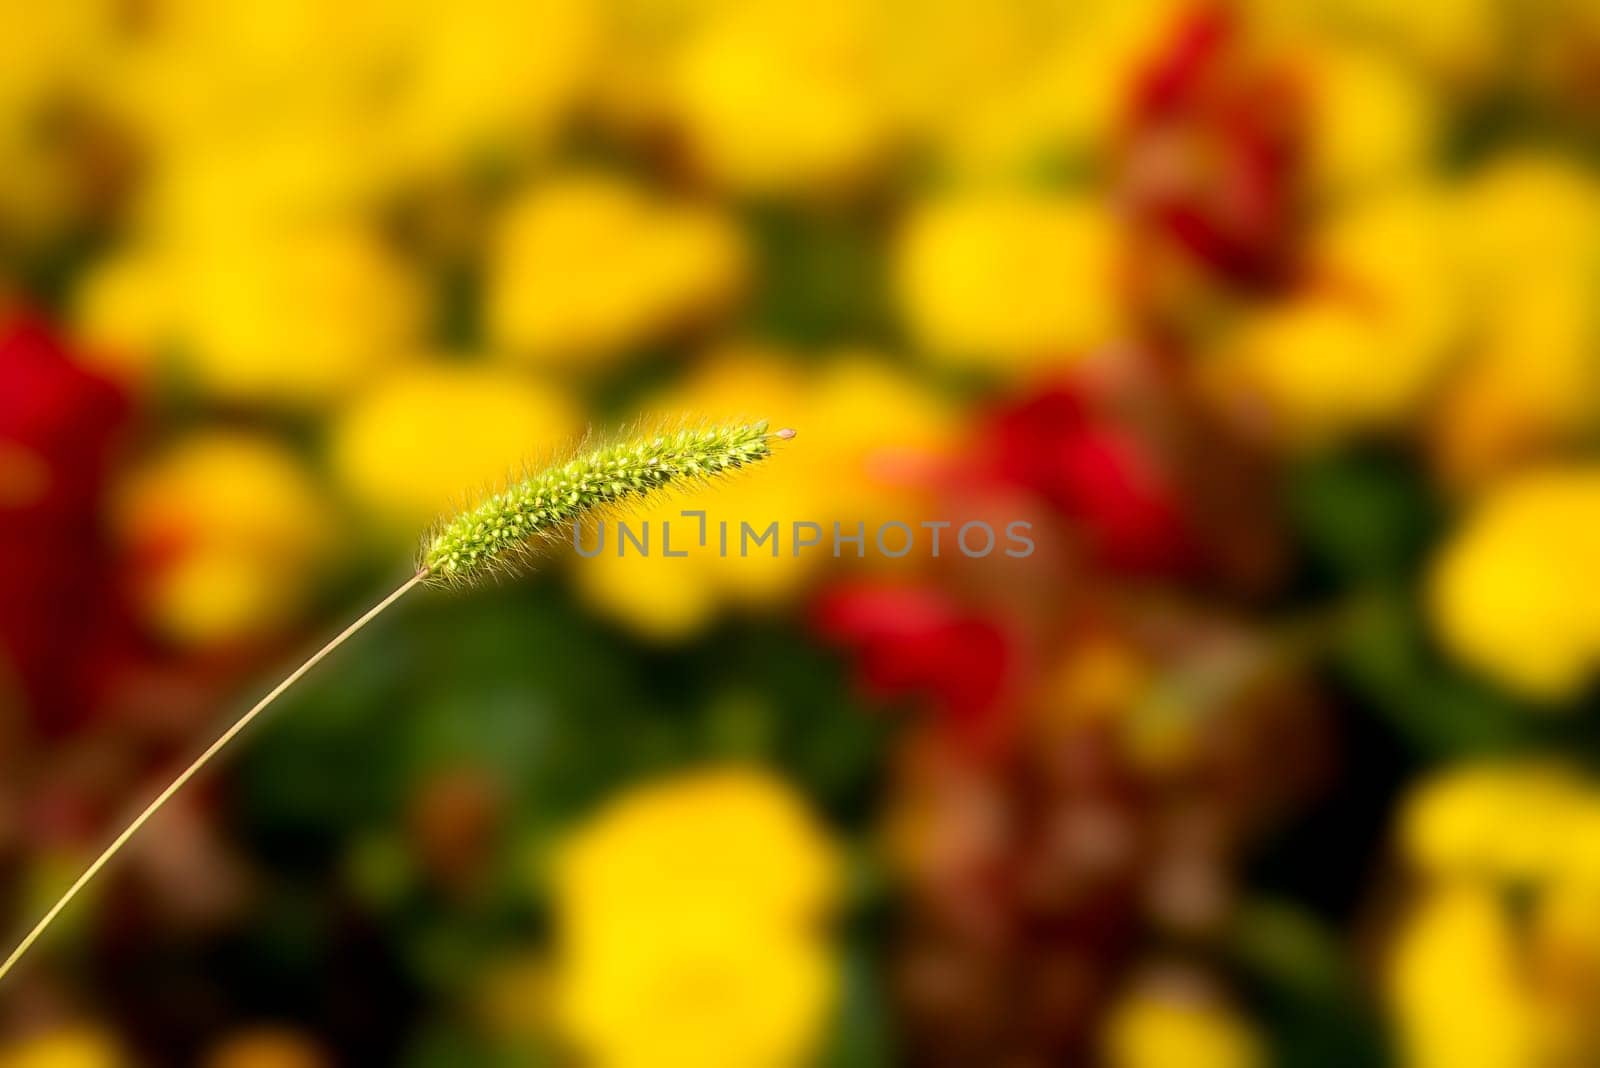 Summer flower bud on a vibrant blurred background, detailed photo of spring flower bud